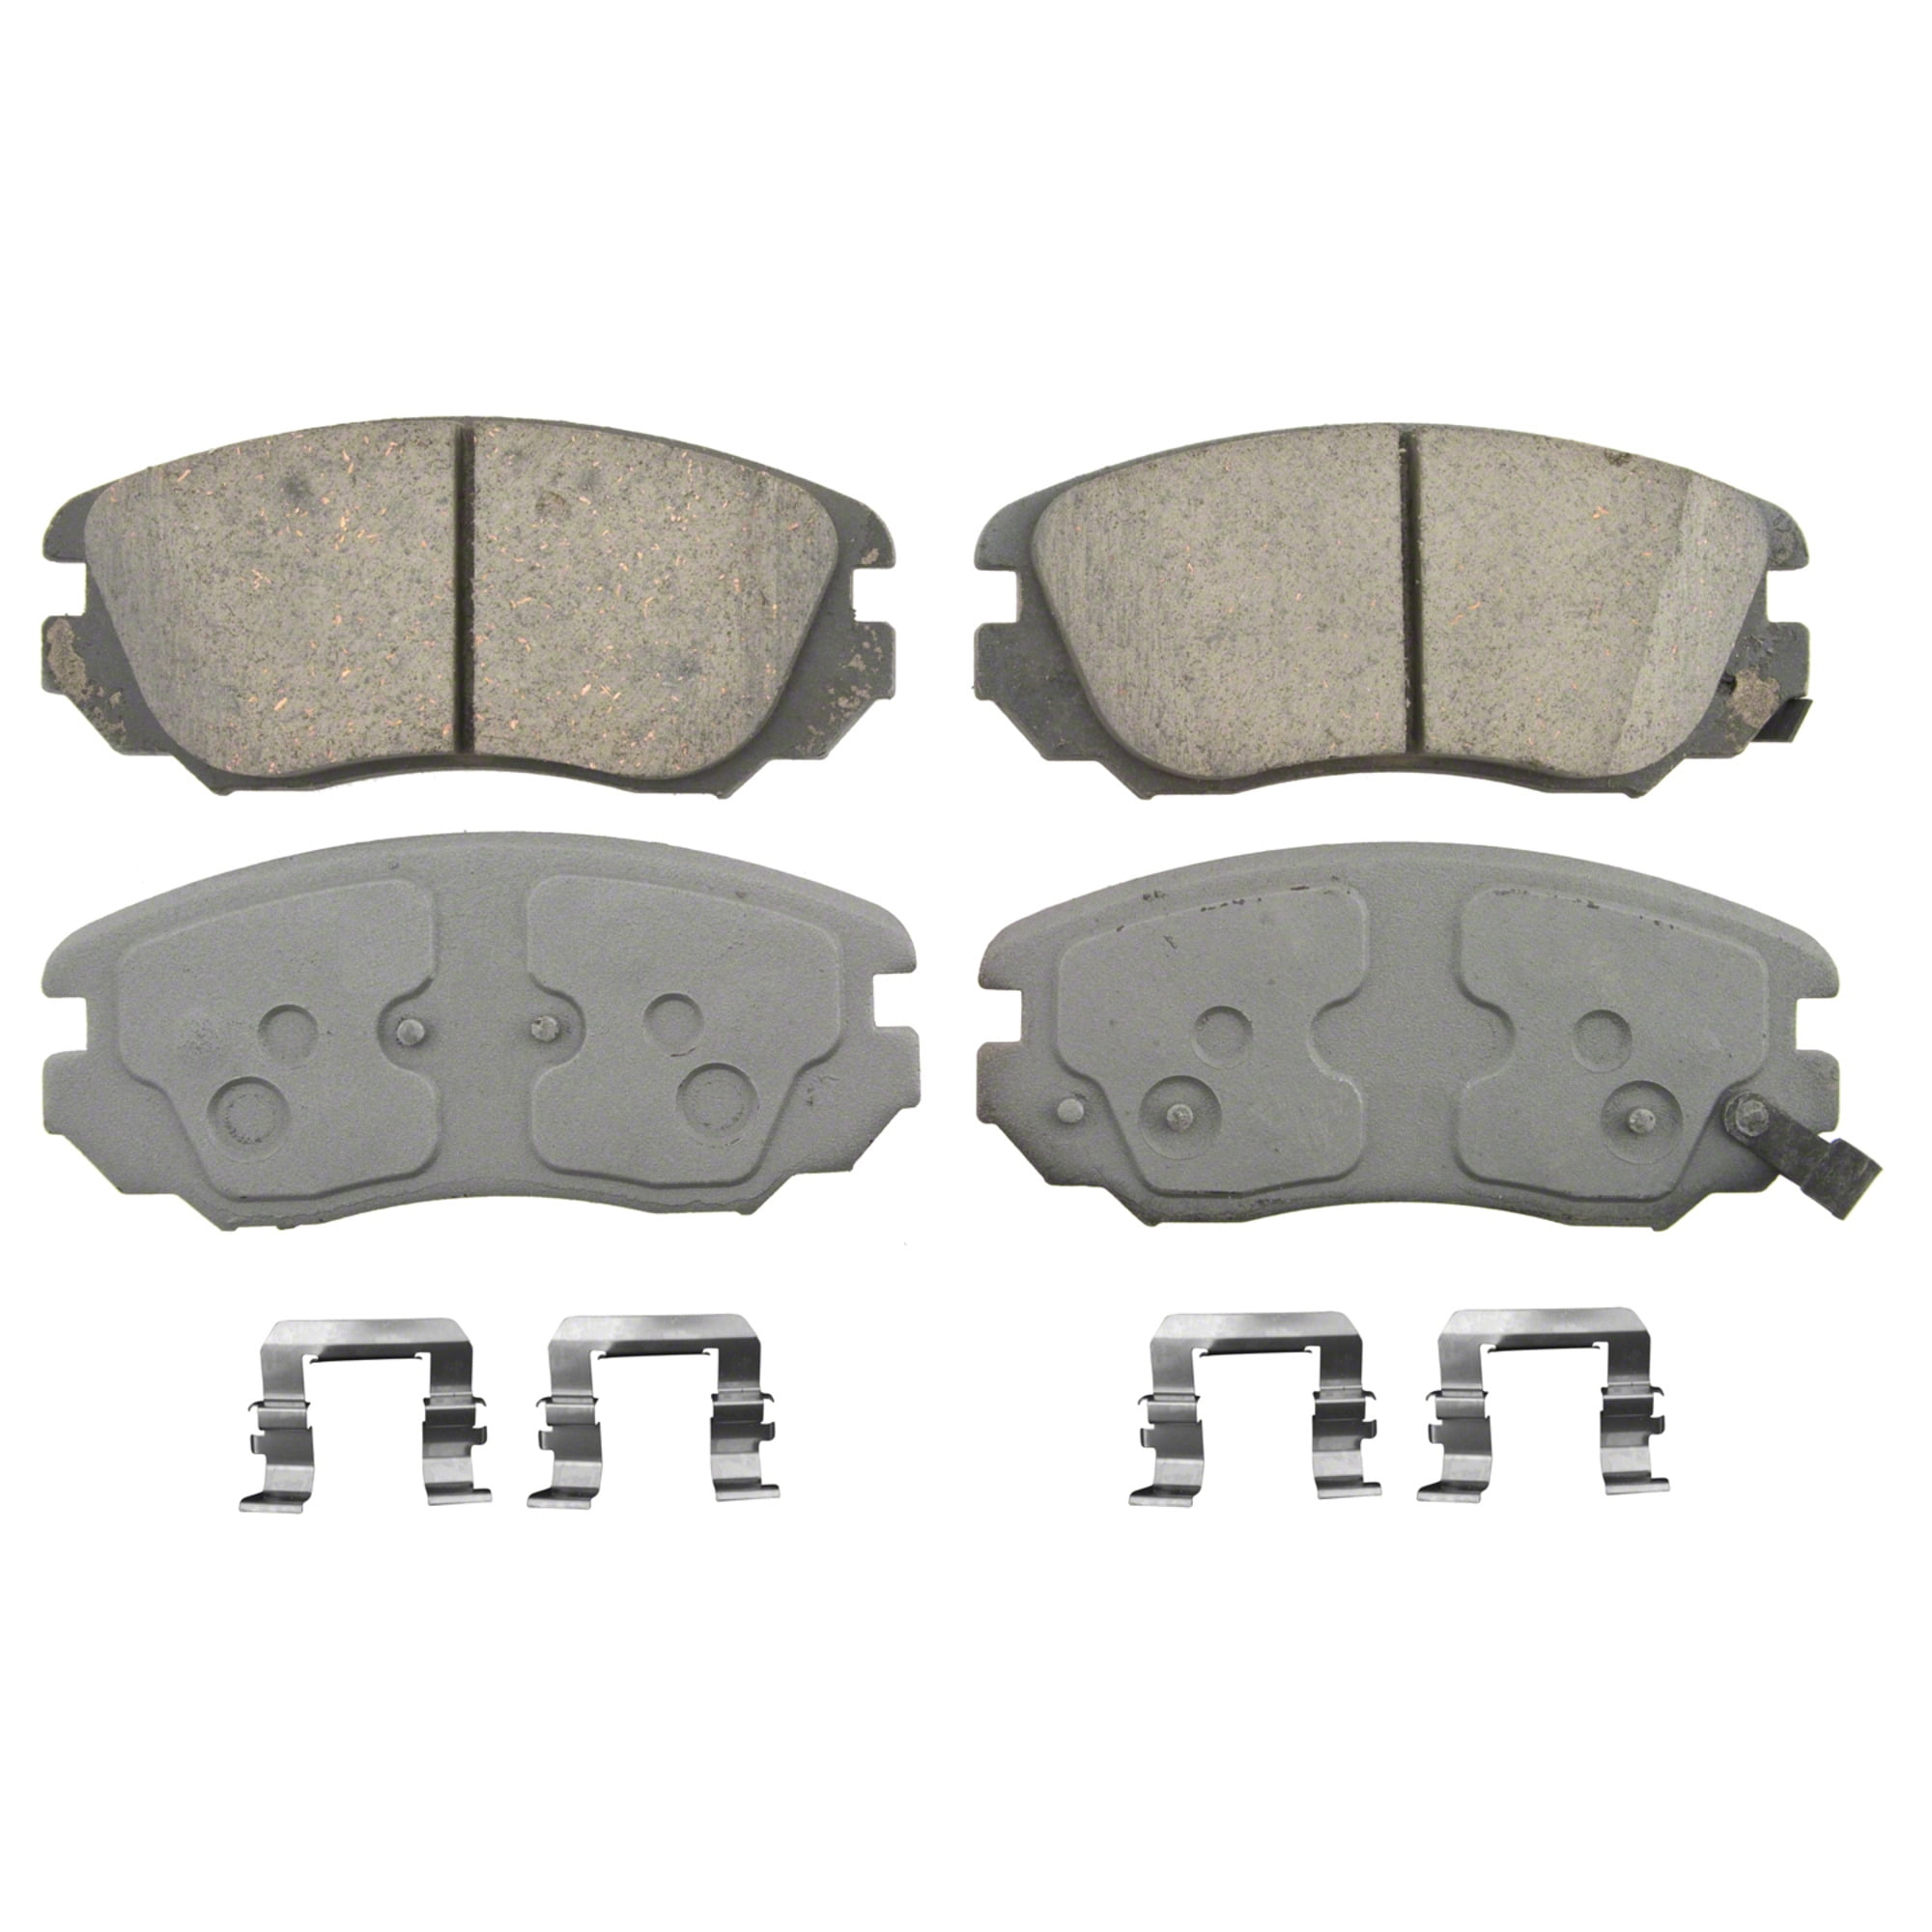 BRAND NEW! Wagner TQ Disc Brake Pads Set ThermoQuiet PD999